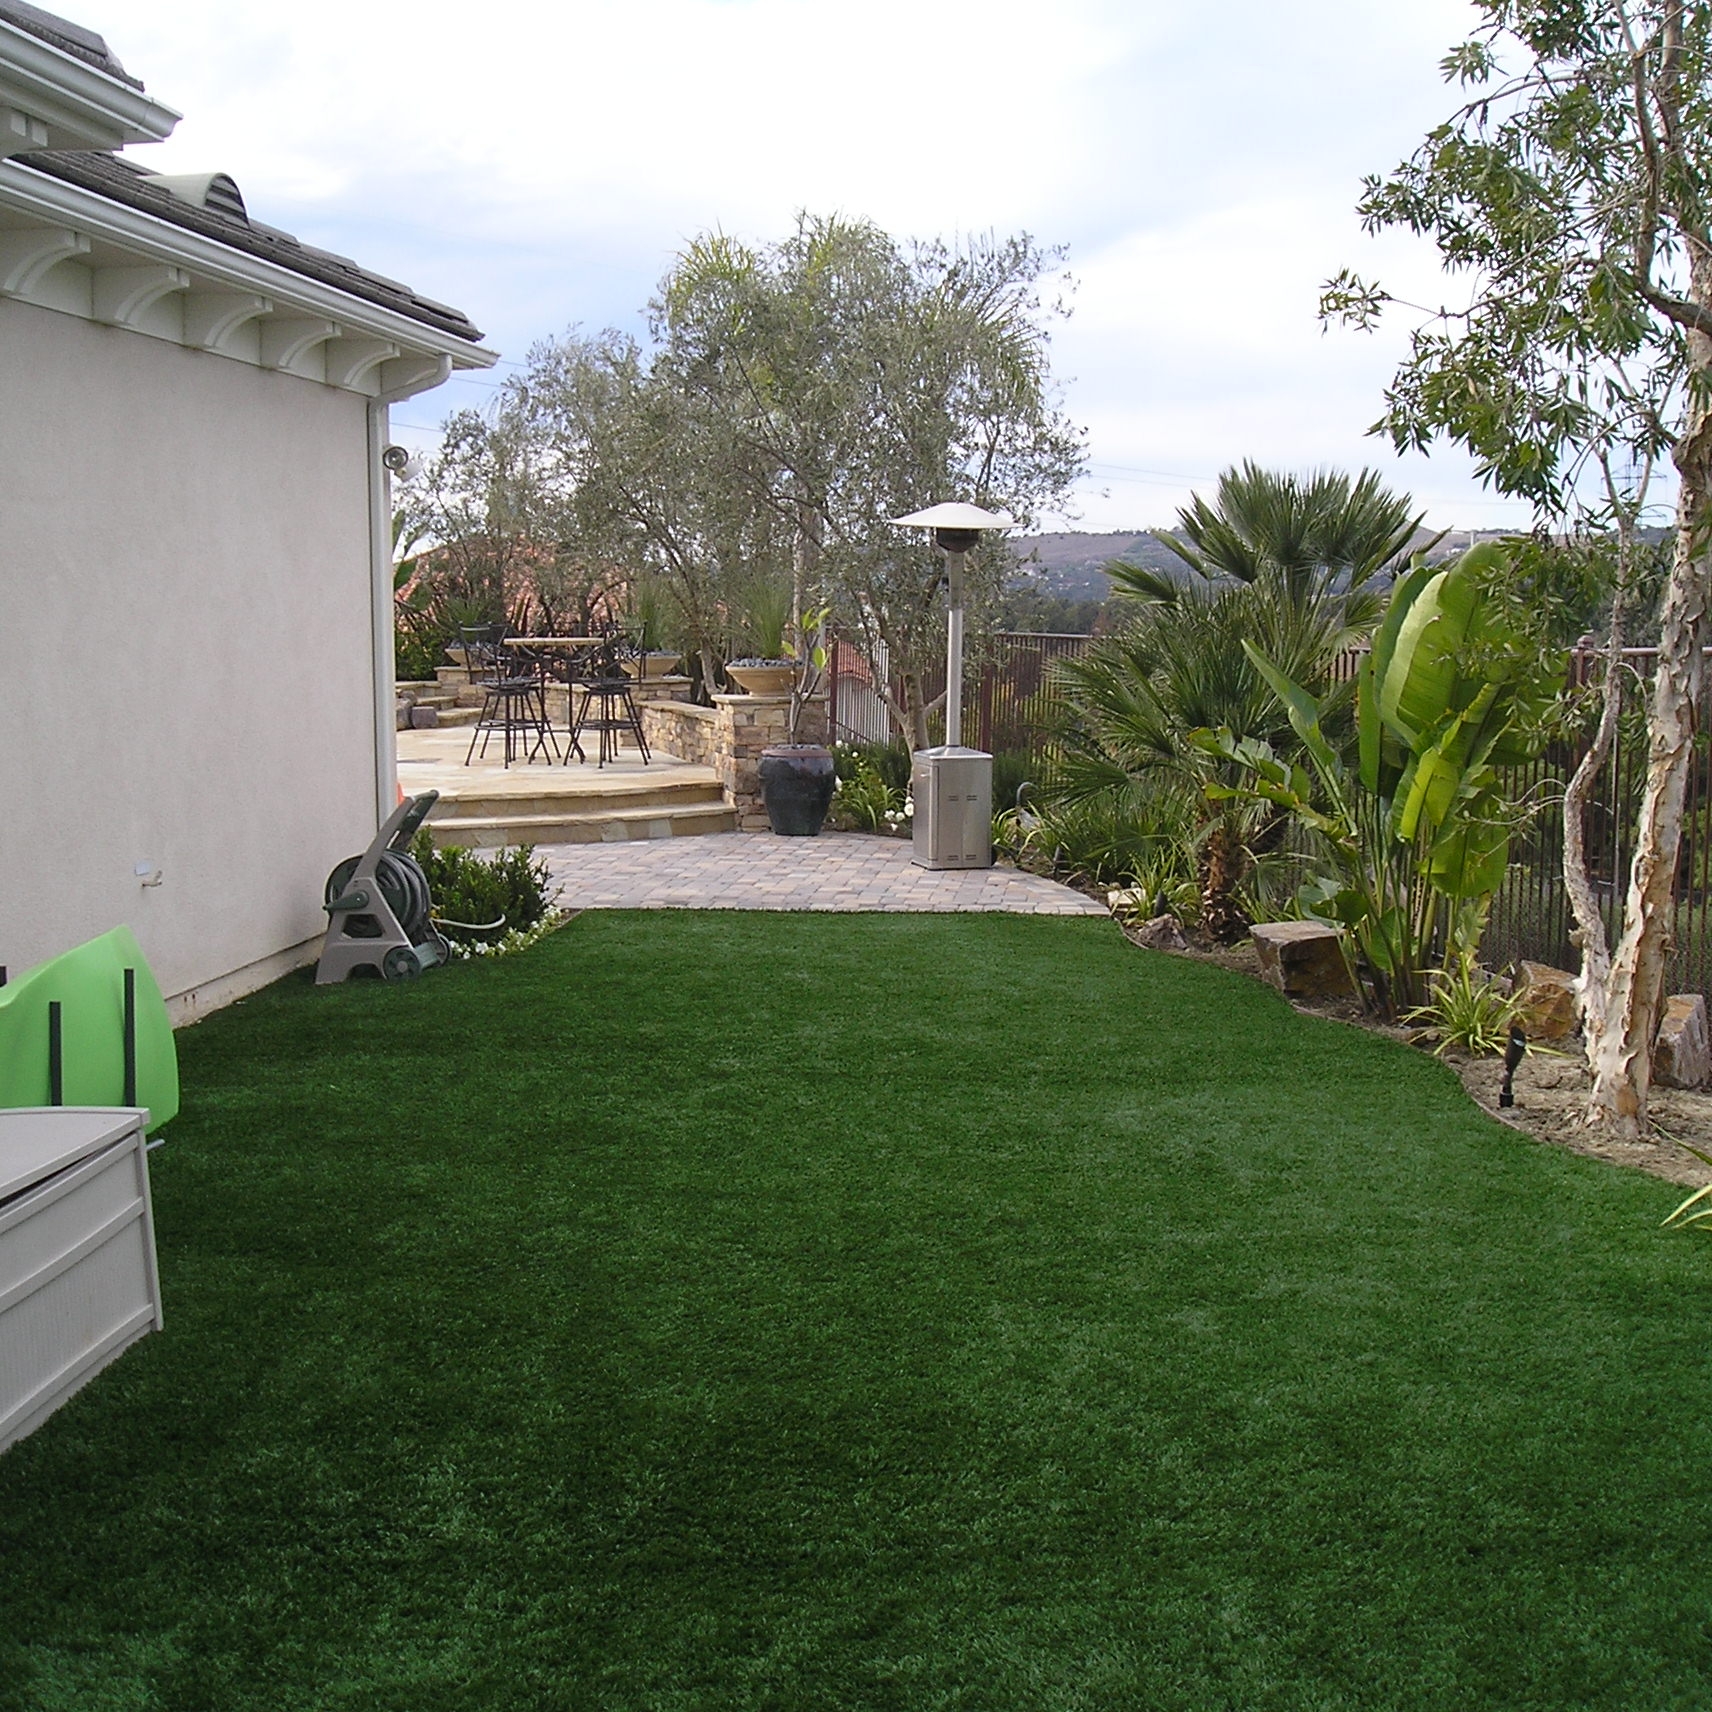 Full Recycle-91 pet friendly artificial grass,fake grass for yard,backyard turf,turf backyard,turf yard,fake grass for backyard,artificial turf,synthetic turf,artificial turf installation,how to install artificial turf,used artificial turf,pet friendly artificial grass